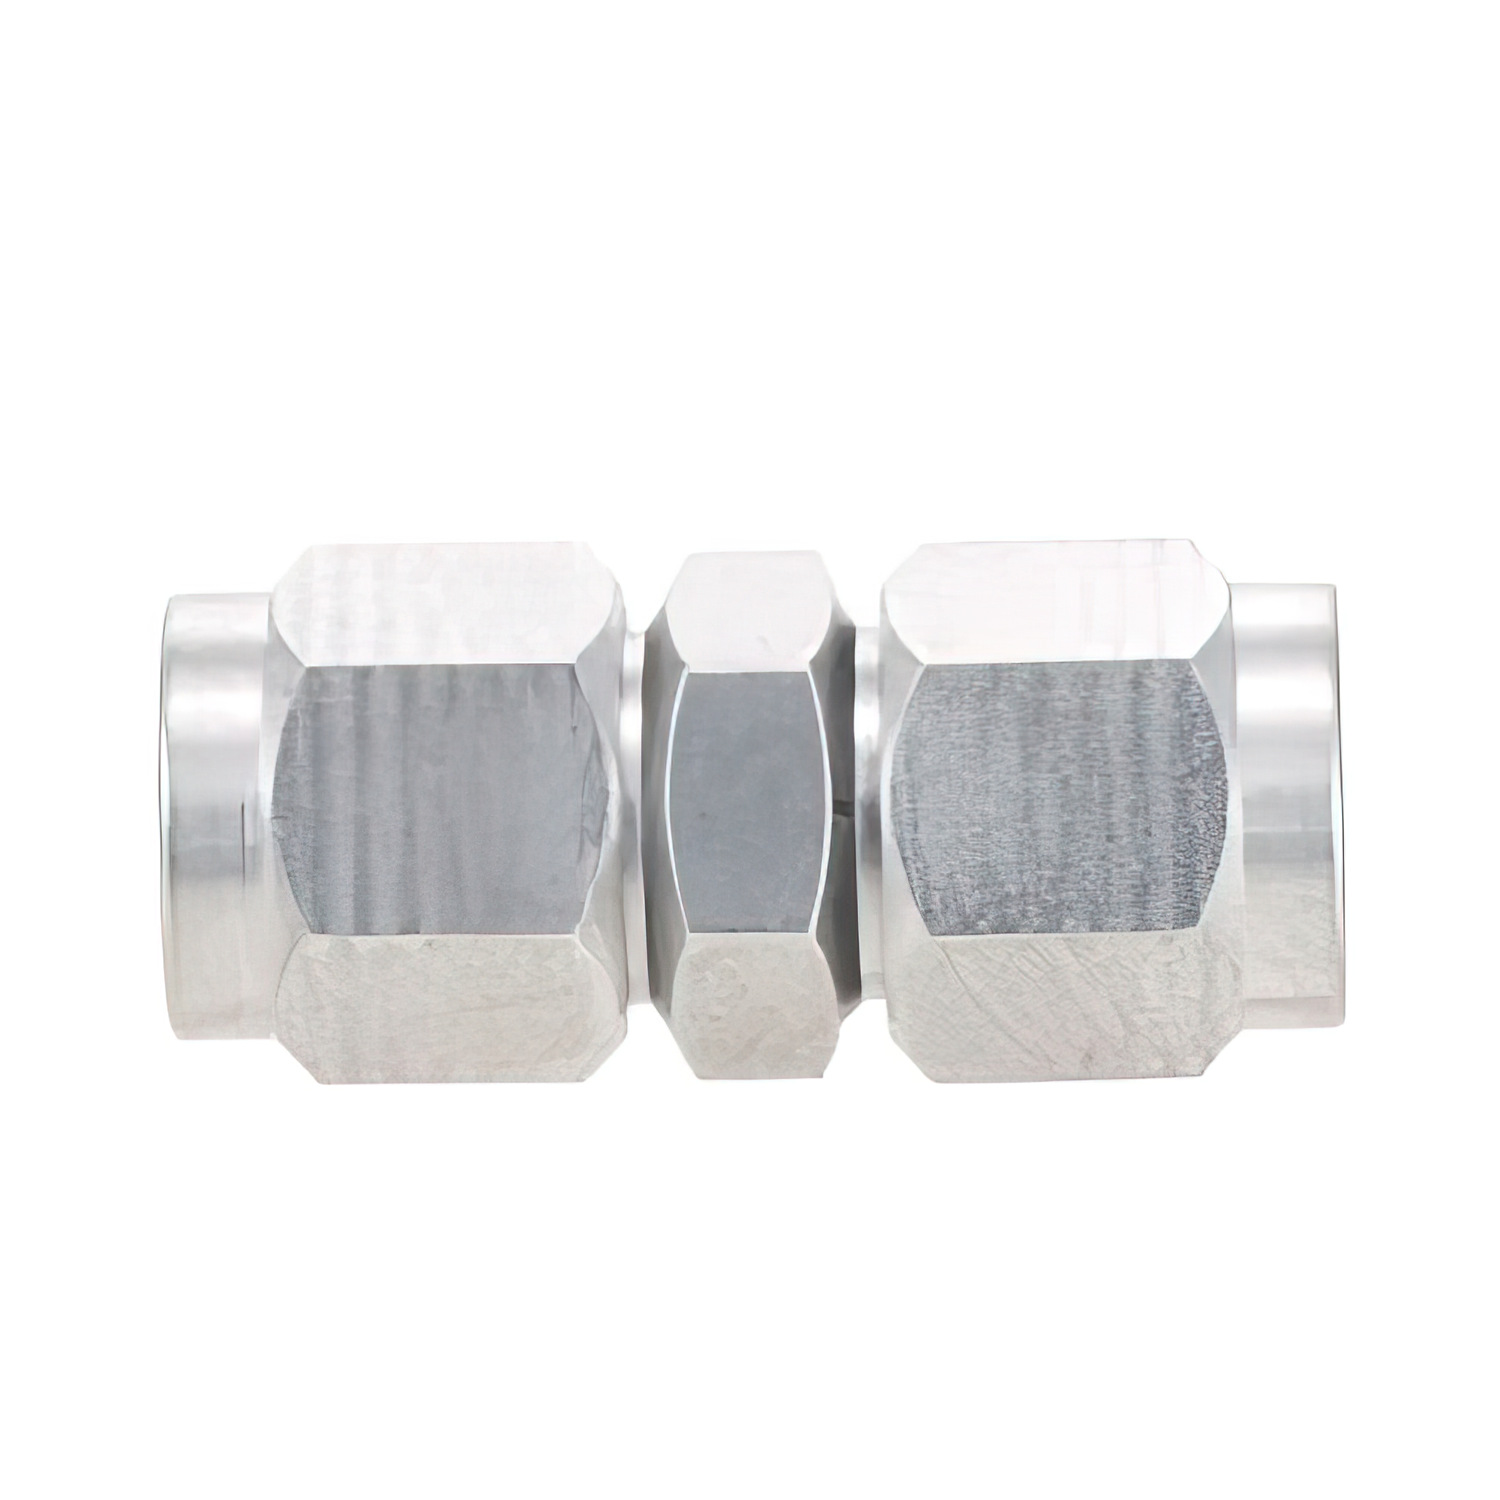 1.0mm Male to 1.0mm Male Adapter 2